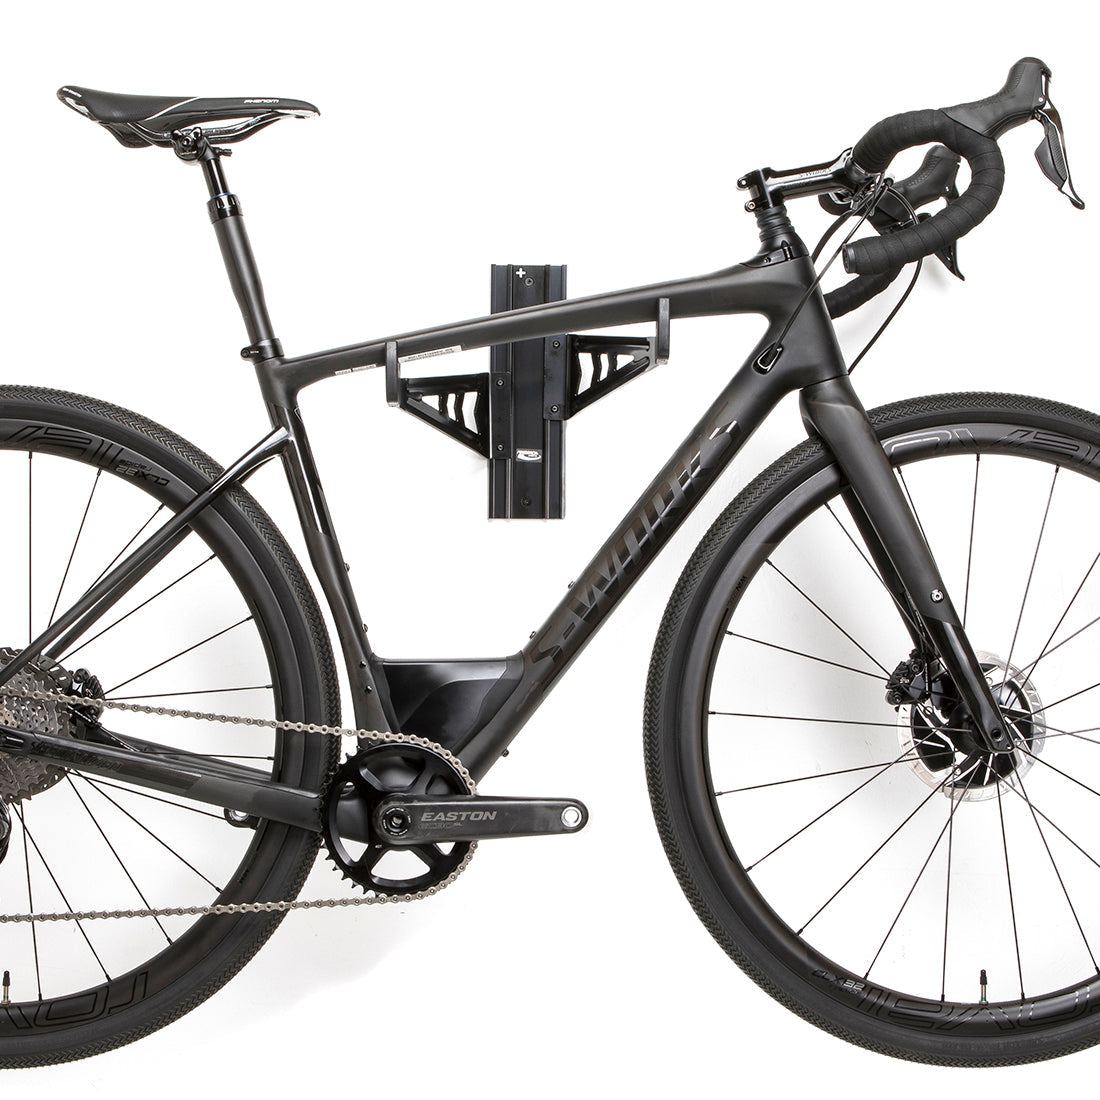 Black road bike viewed from side, suspended on wall mounted bike storage cradle arms.